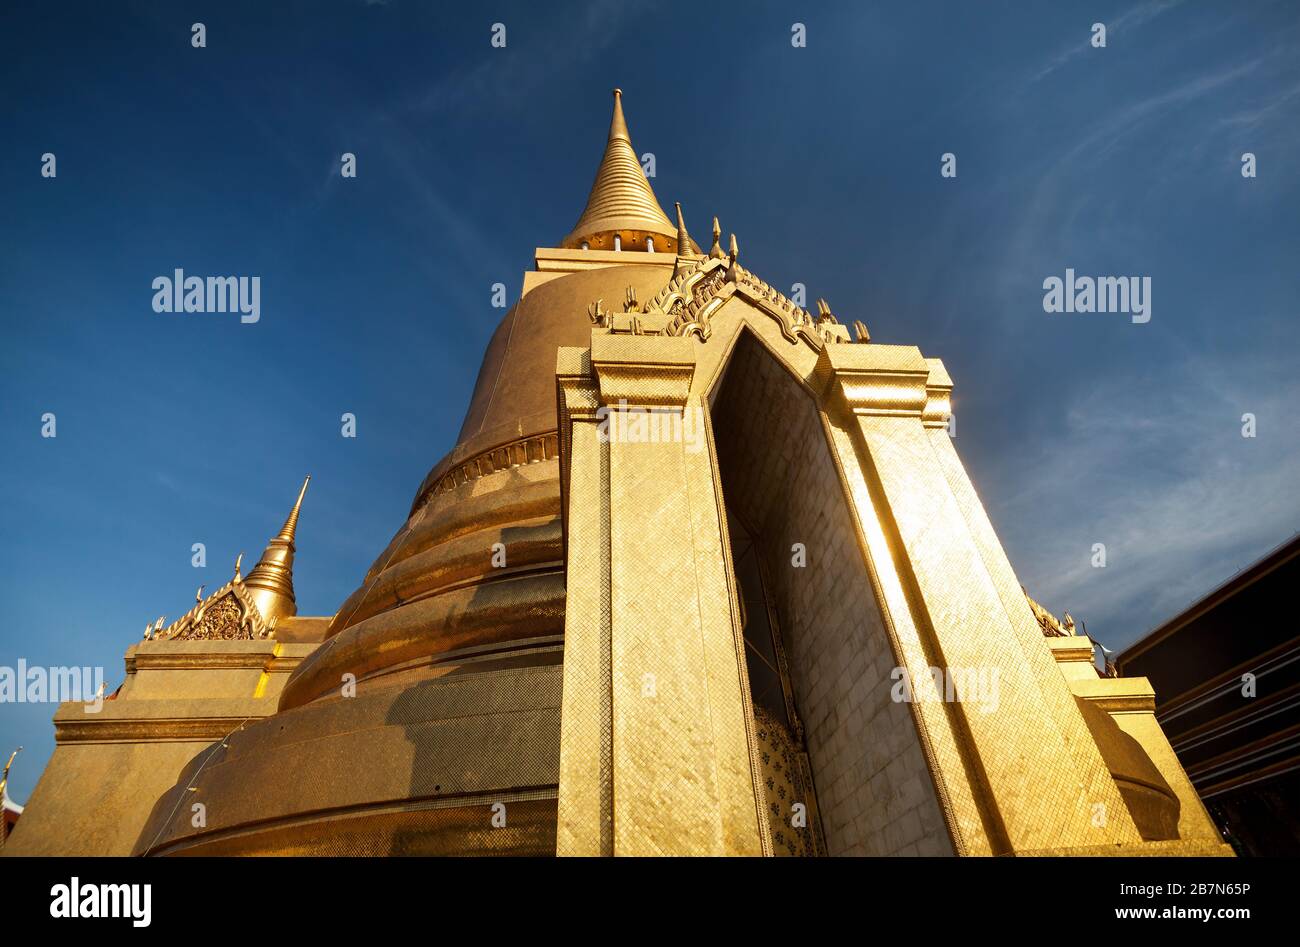 Golden Stupa in the Temple of the Emerald Buddha in Bangkok, Thailand Stock Photo